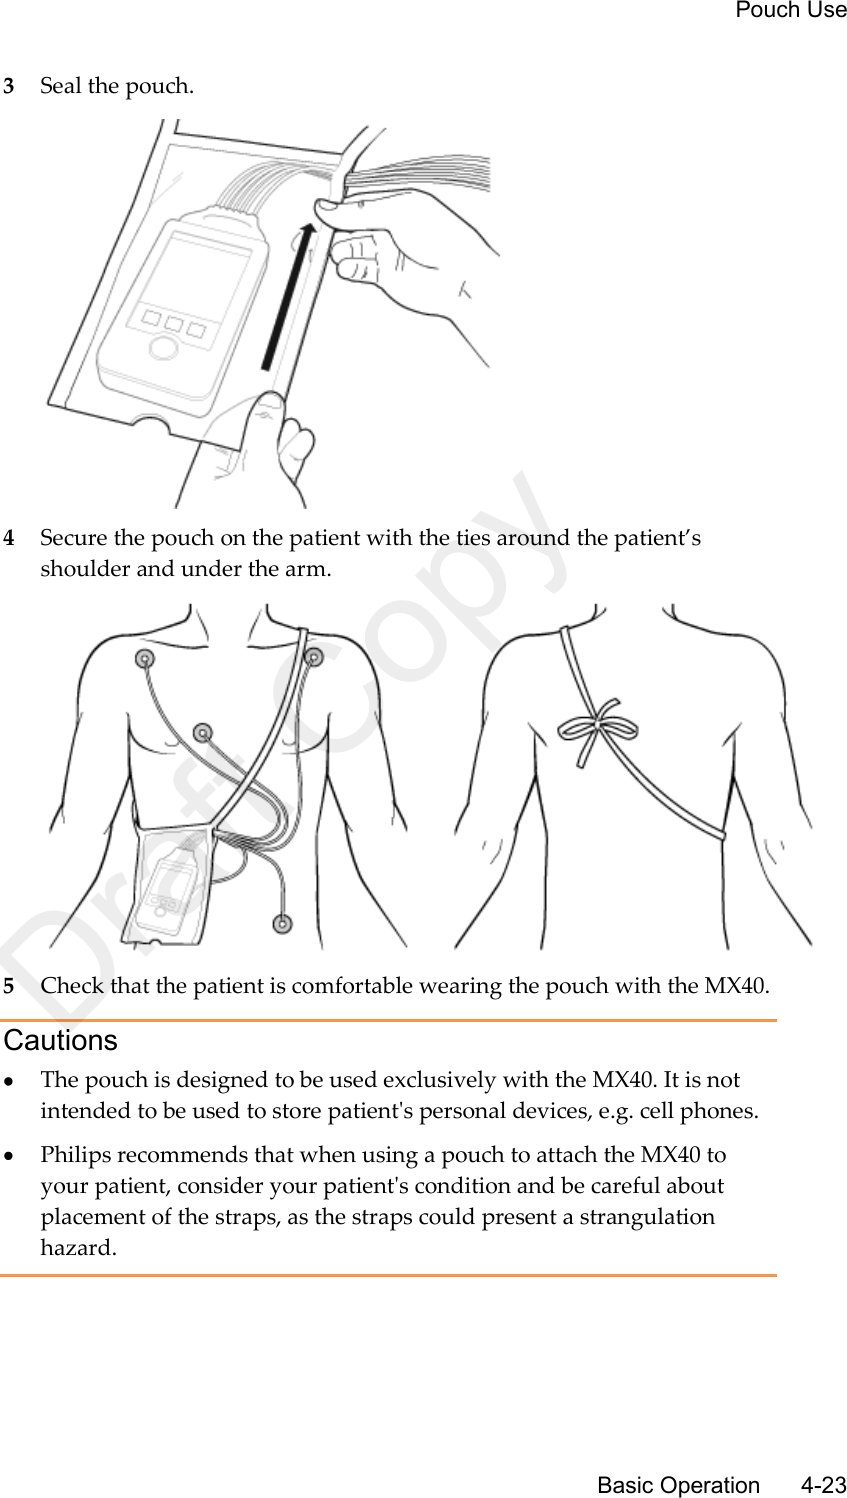     Pouch Use       Basic Operation      4-23 3 Seal the pouch.  4 Secure the pouch on the patient with the ties around the patient’s shoulder and under the arm.  5 Check that the patient is comfortable wearing the pouch with the MX40.   Cautions  The pouch is designed to be used exclusively with the MX40. It is not intended to be used to store patient&apos;s personal devices, e.g. cell phones.  Philips recommends that when using a pouch to attach the MX40 to your patient, consider your patient&apos;s condition and be careful about placement of the straps, as the straps could present a strangulation hazard.   Draft Copy